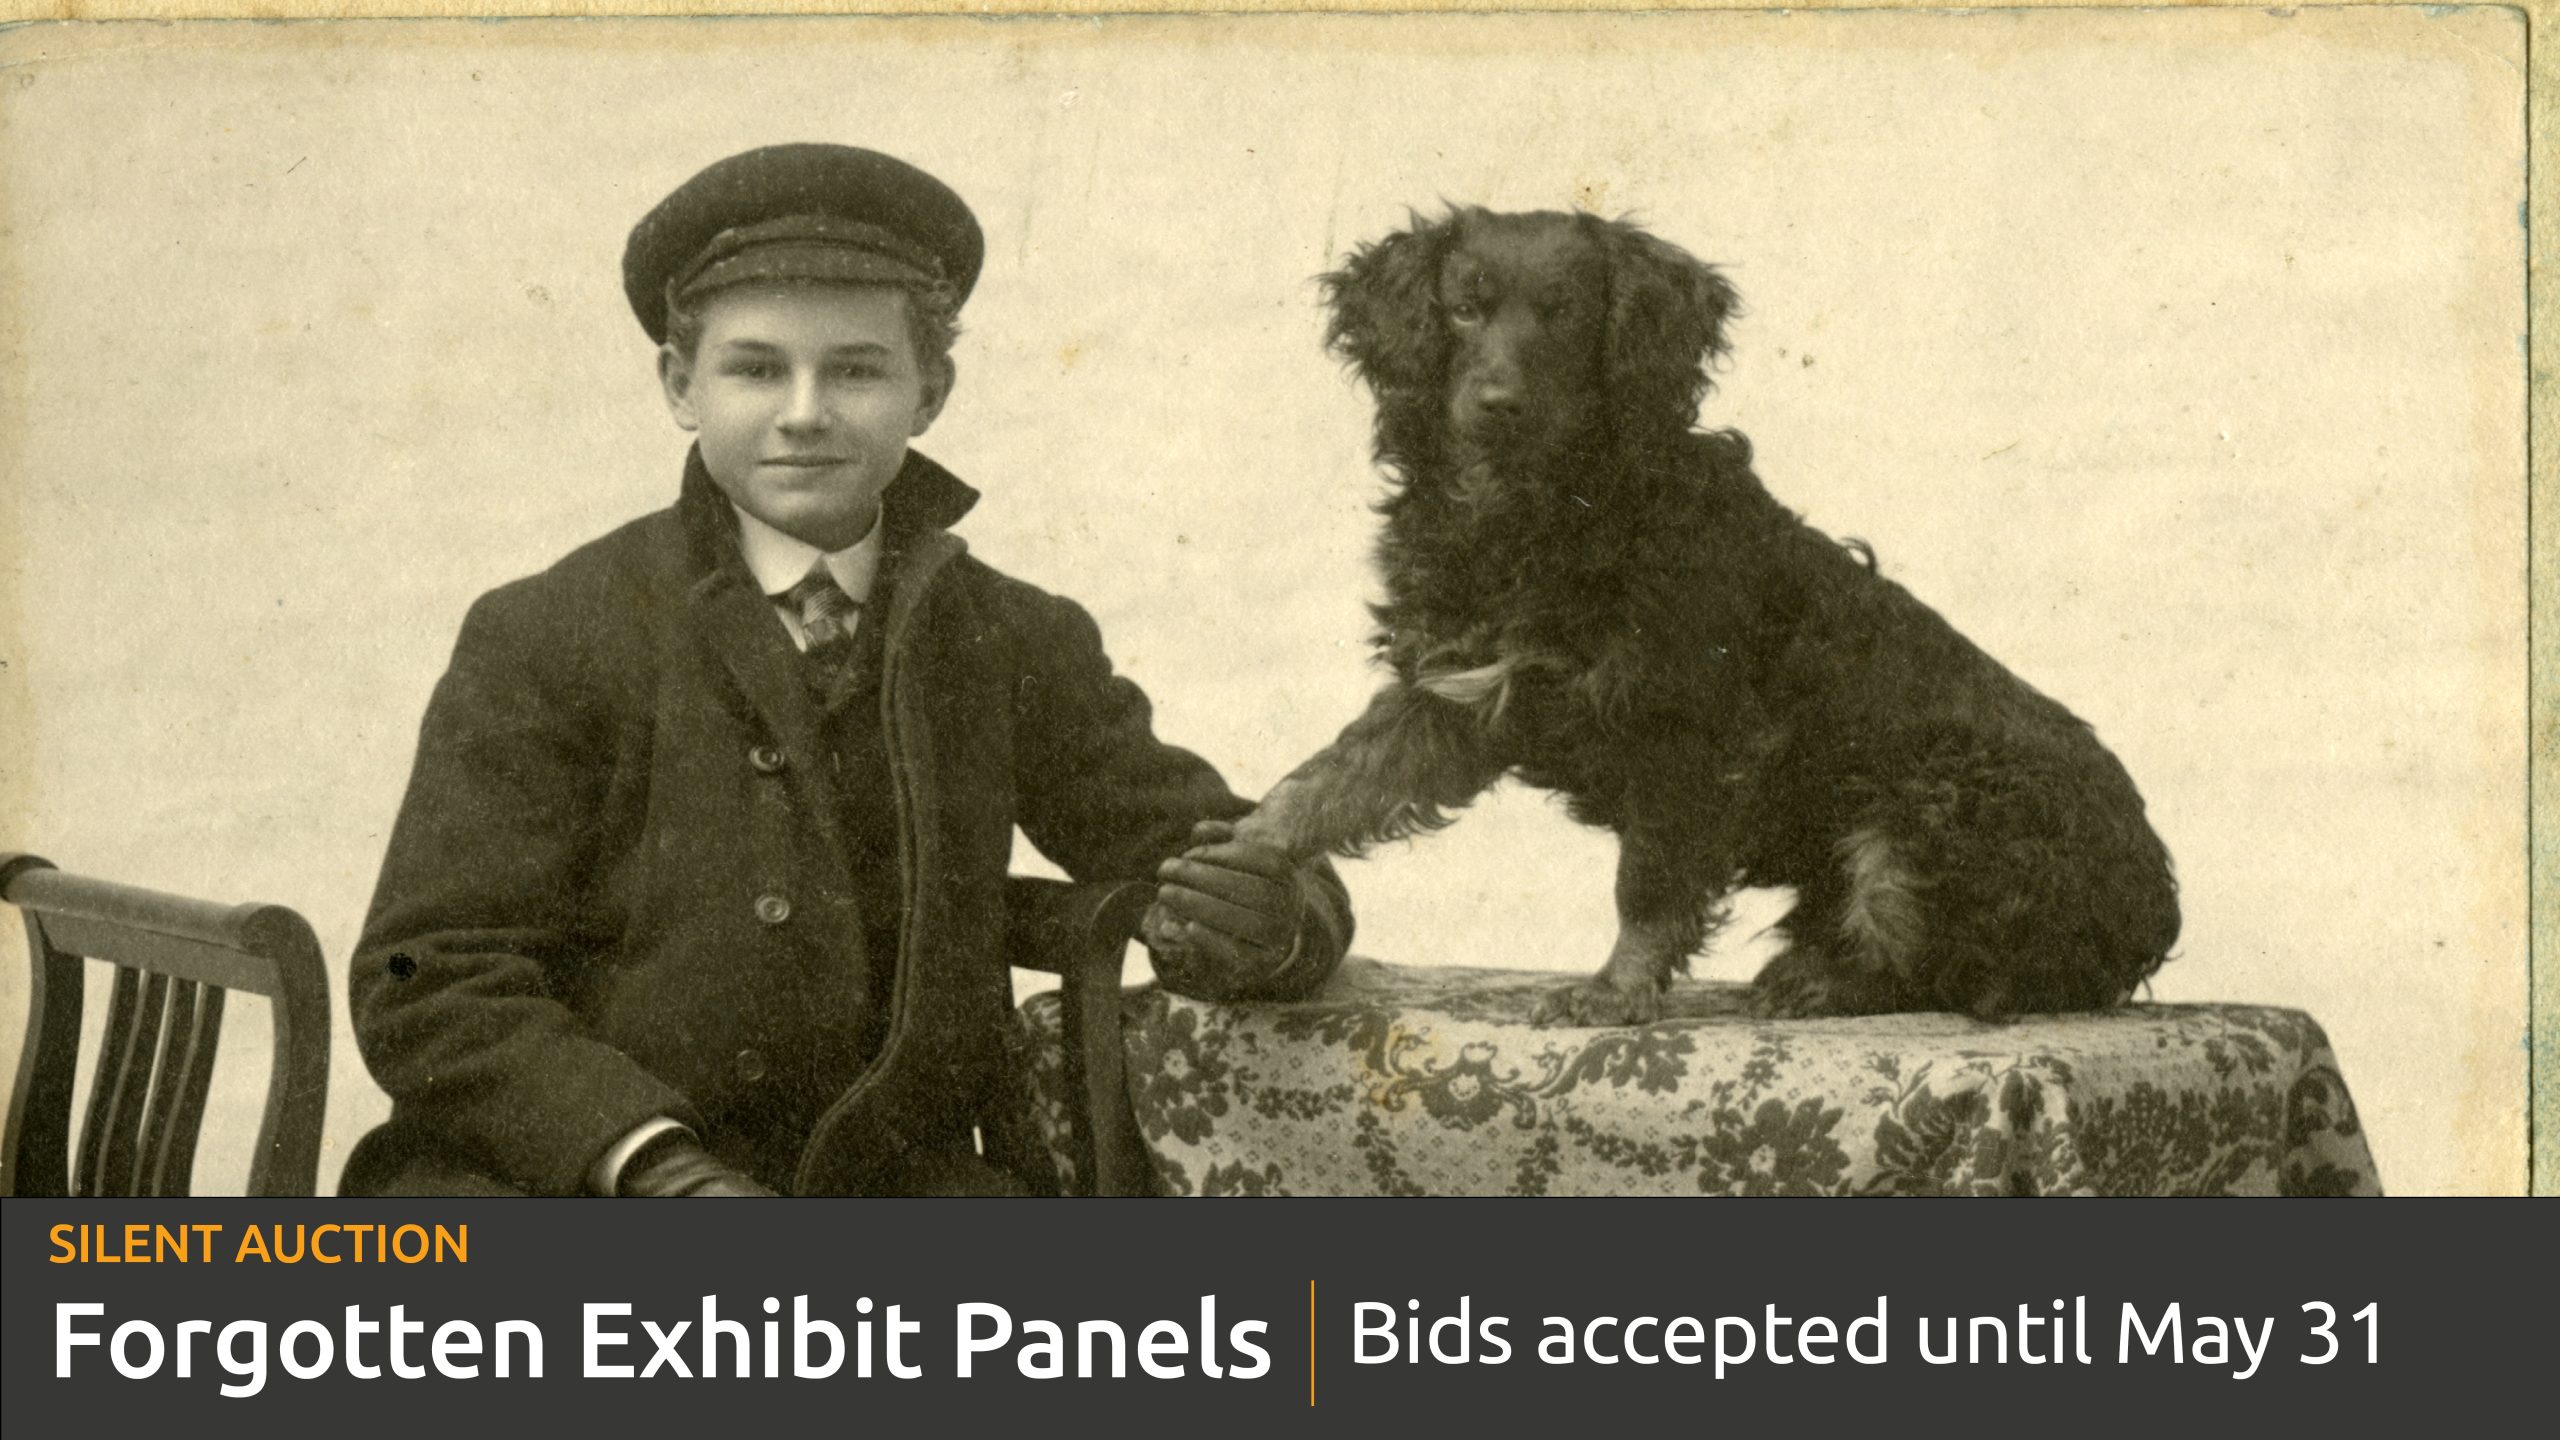 Historic image of a boy with his dog and text promoting silent auction<br />
